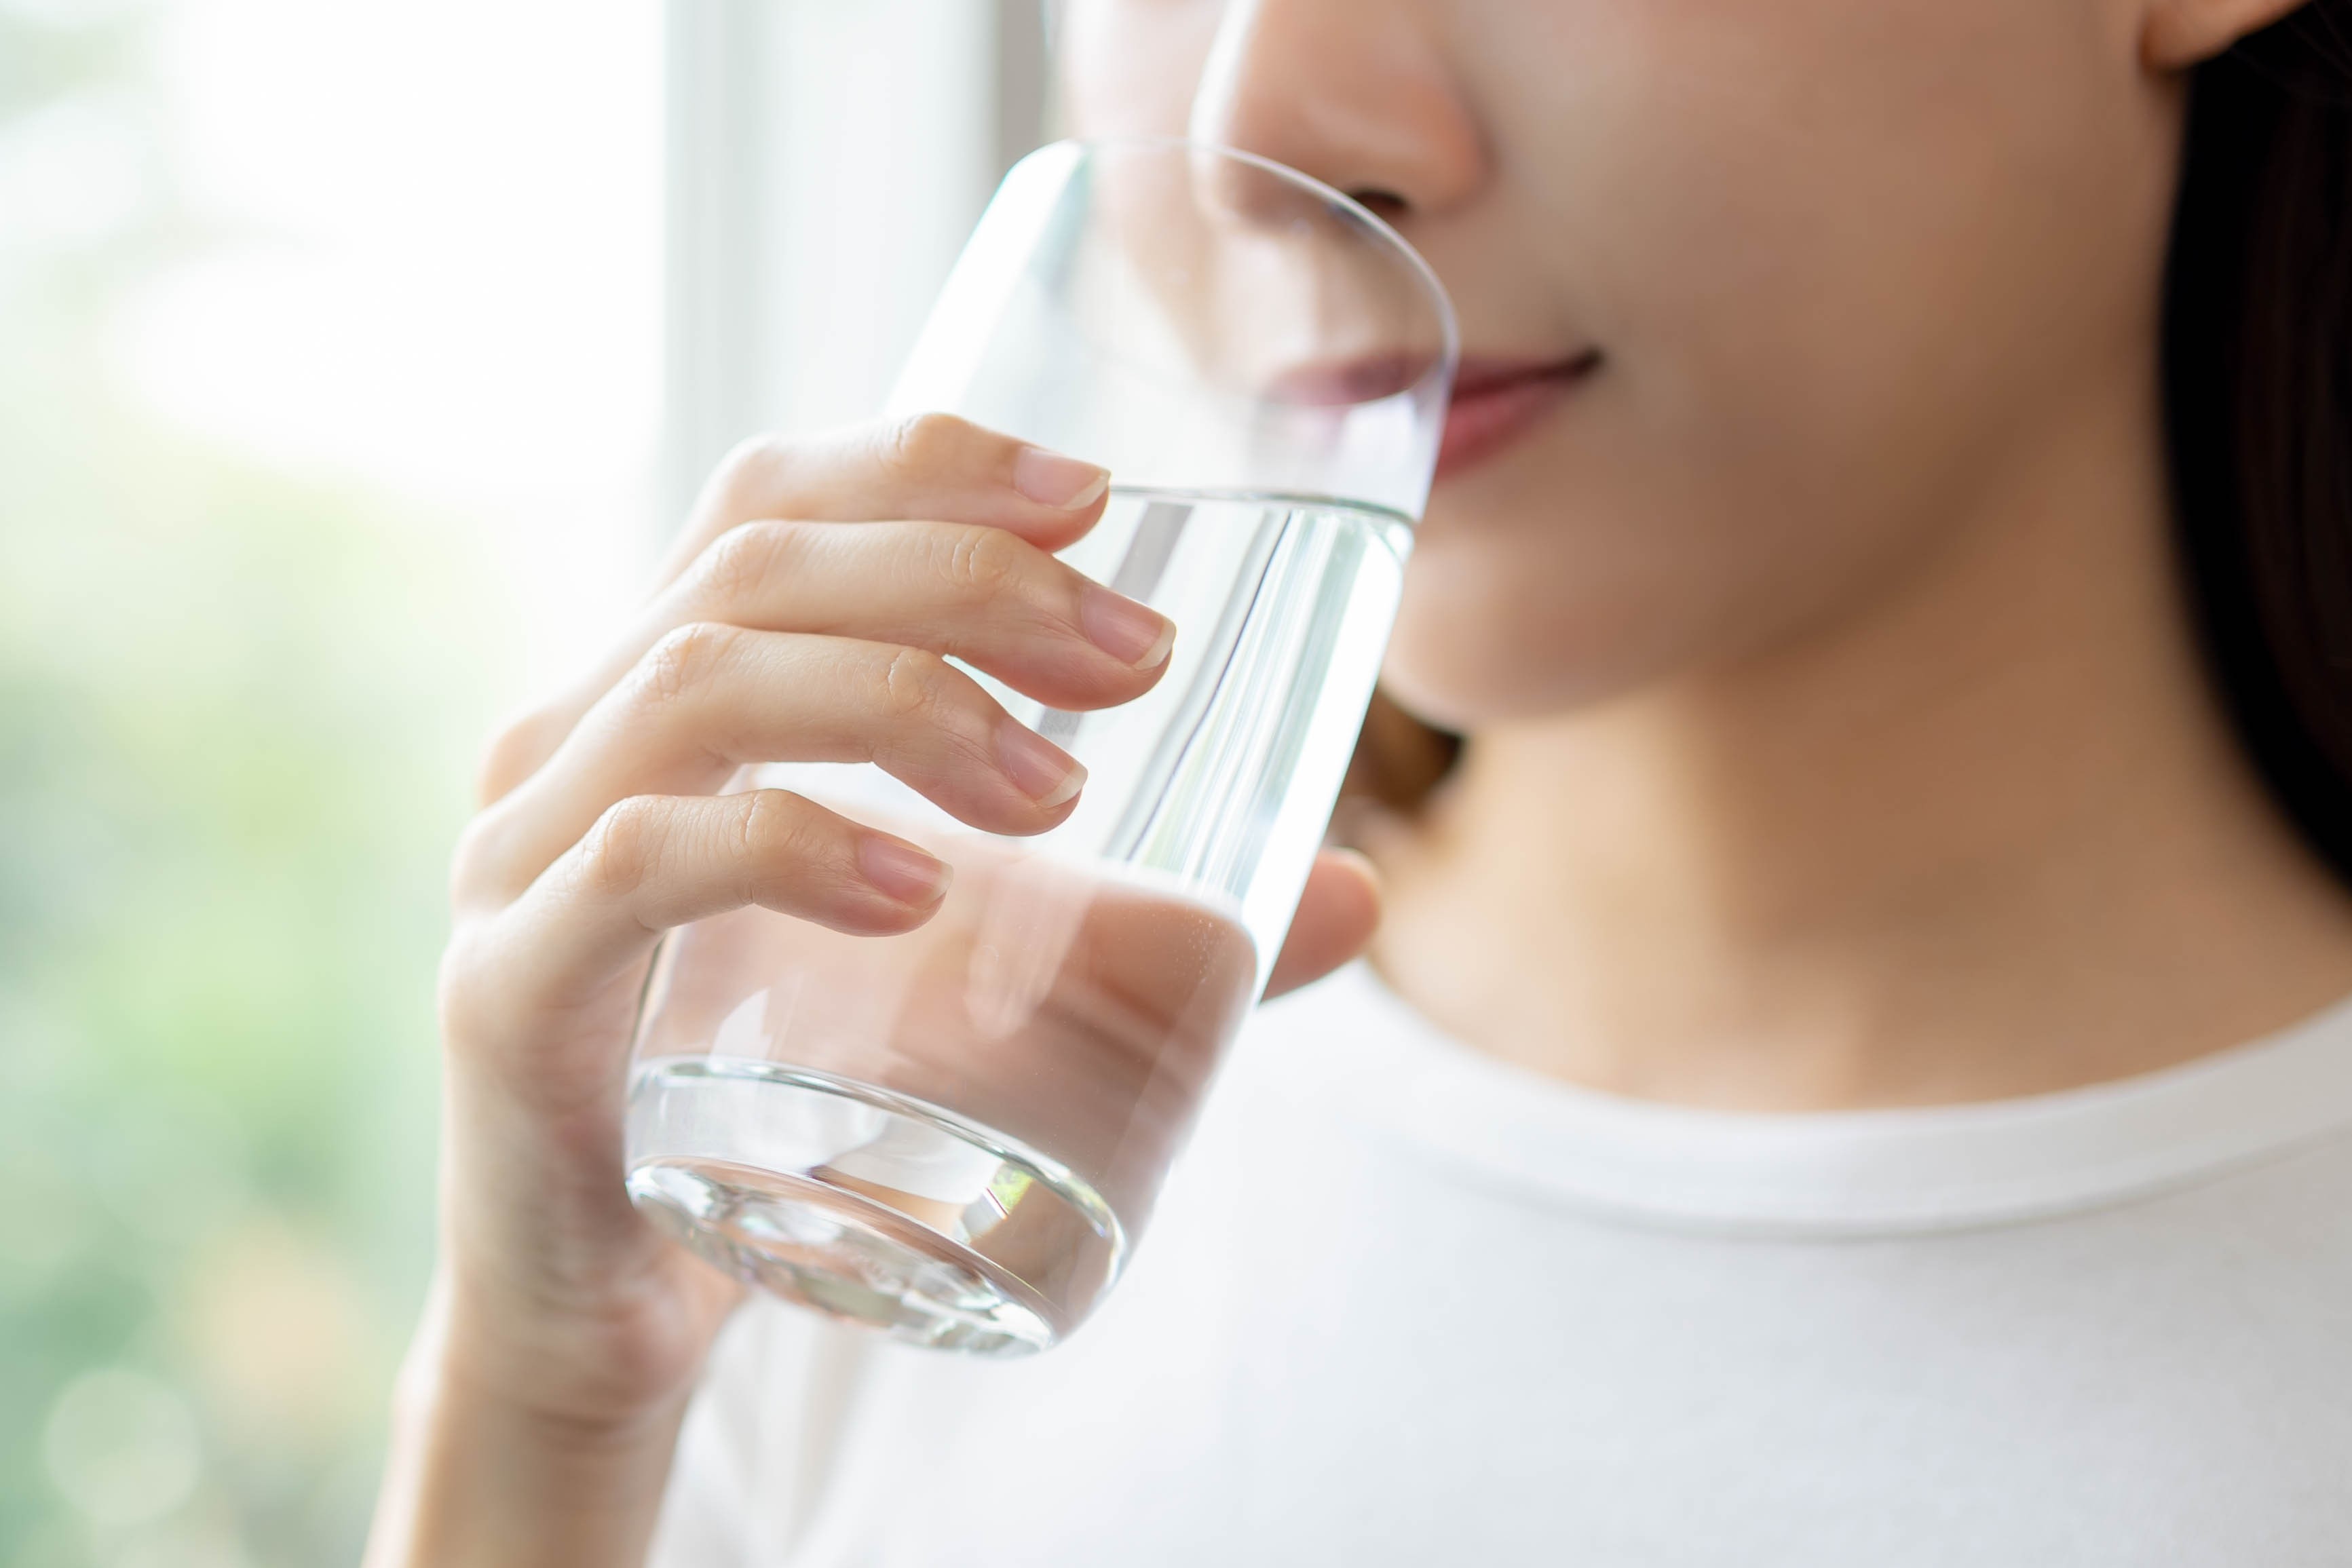 A South Korean woman says she was served water contaning bleach at a restaurant in Tokyo. Photo: Shutterstock